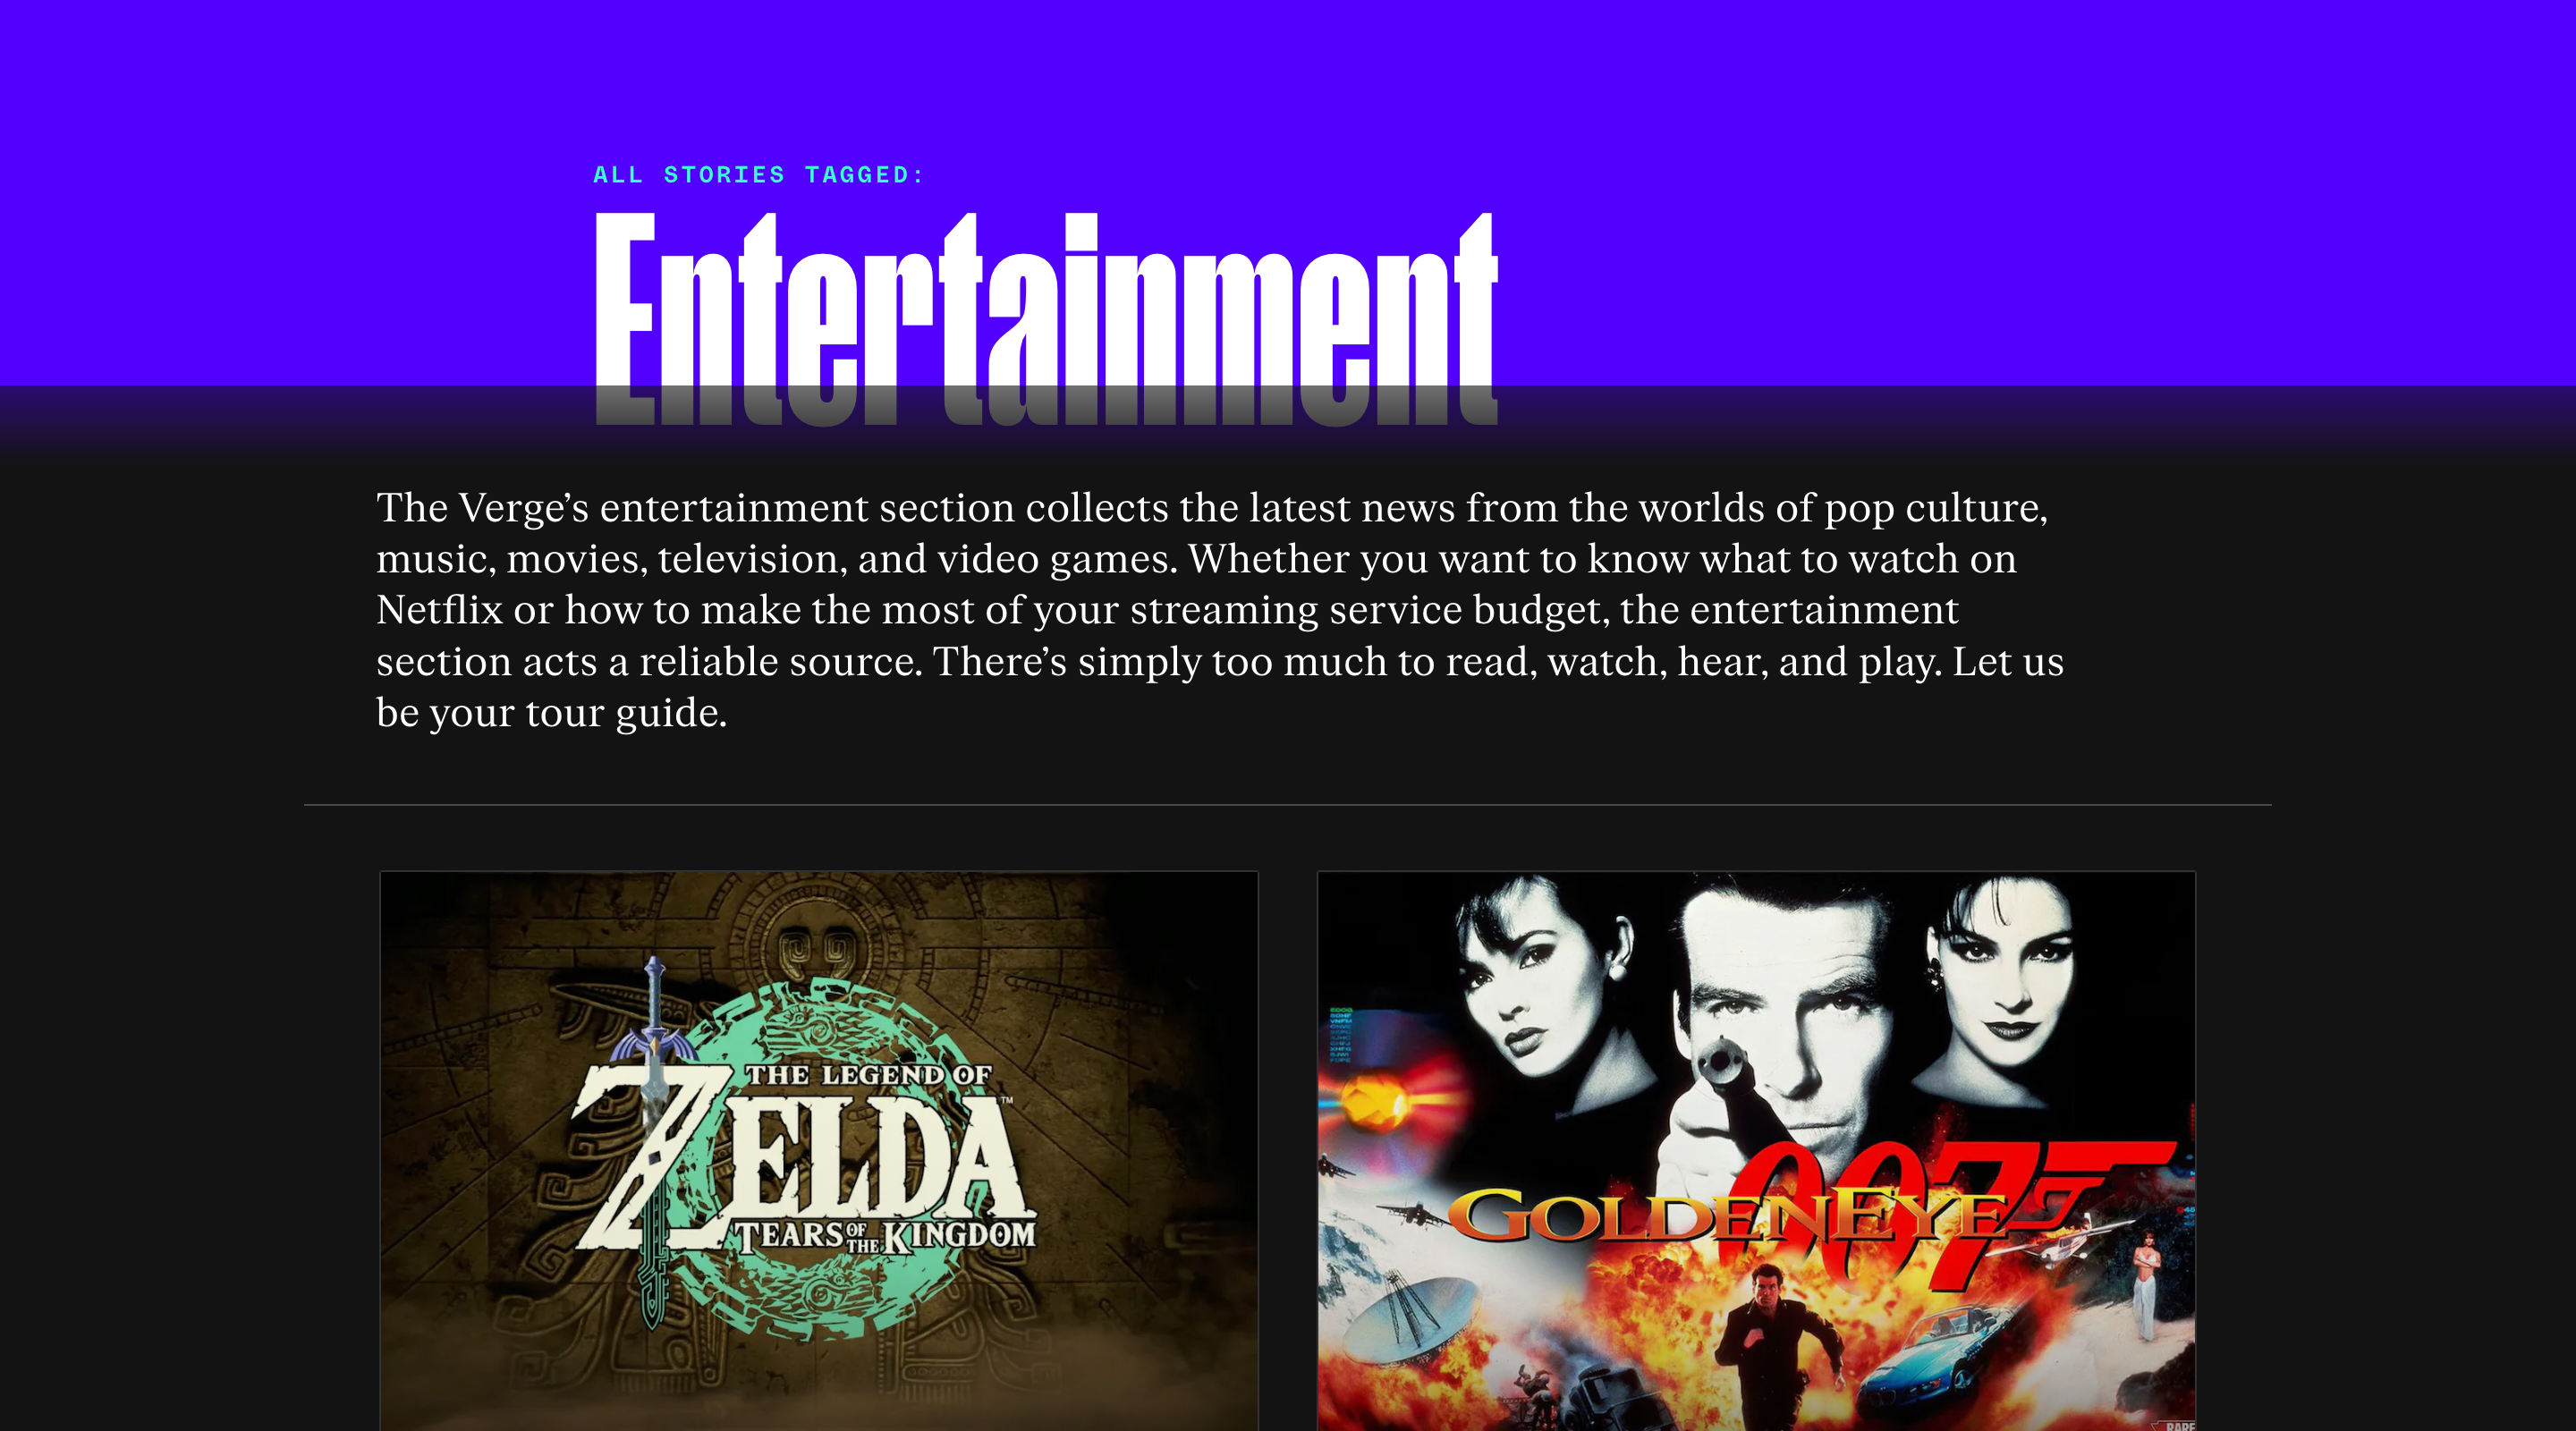 Screenshot of the 'Entertainment' section of the Verge website. The page title is displayed in large lettering at the top of the screen. Below is an introduction paragraph followed by two side-by-side images from entertainment articles.